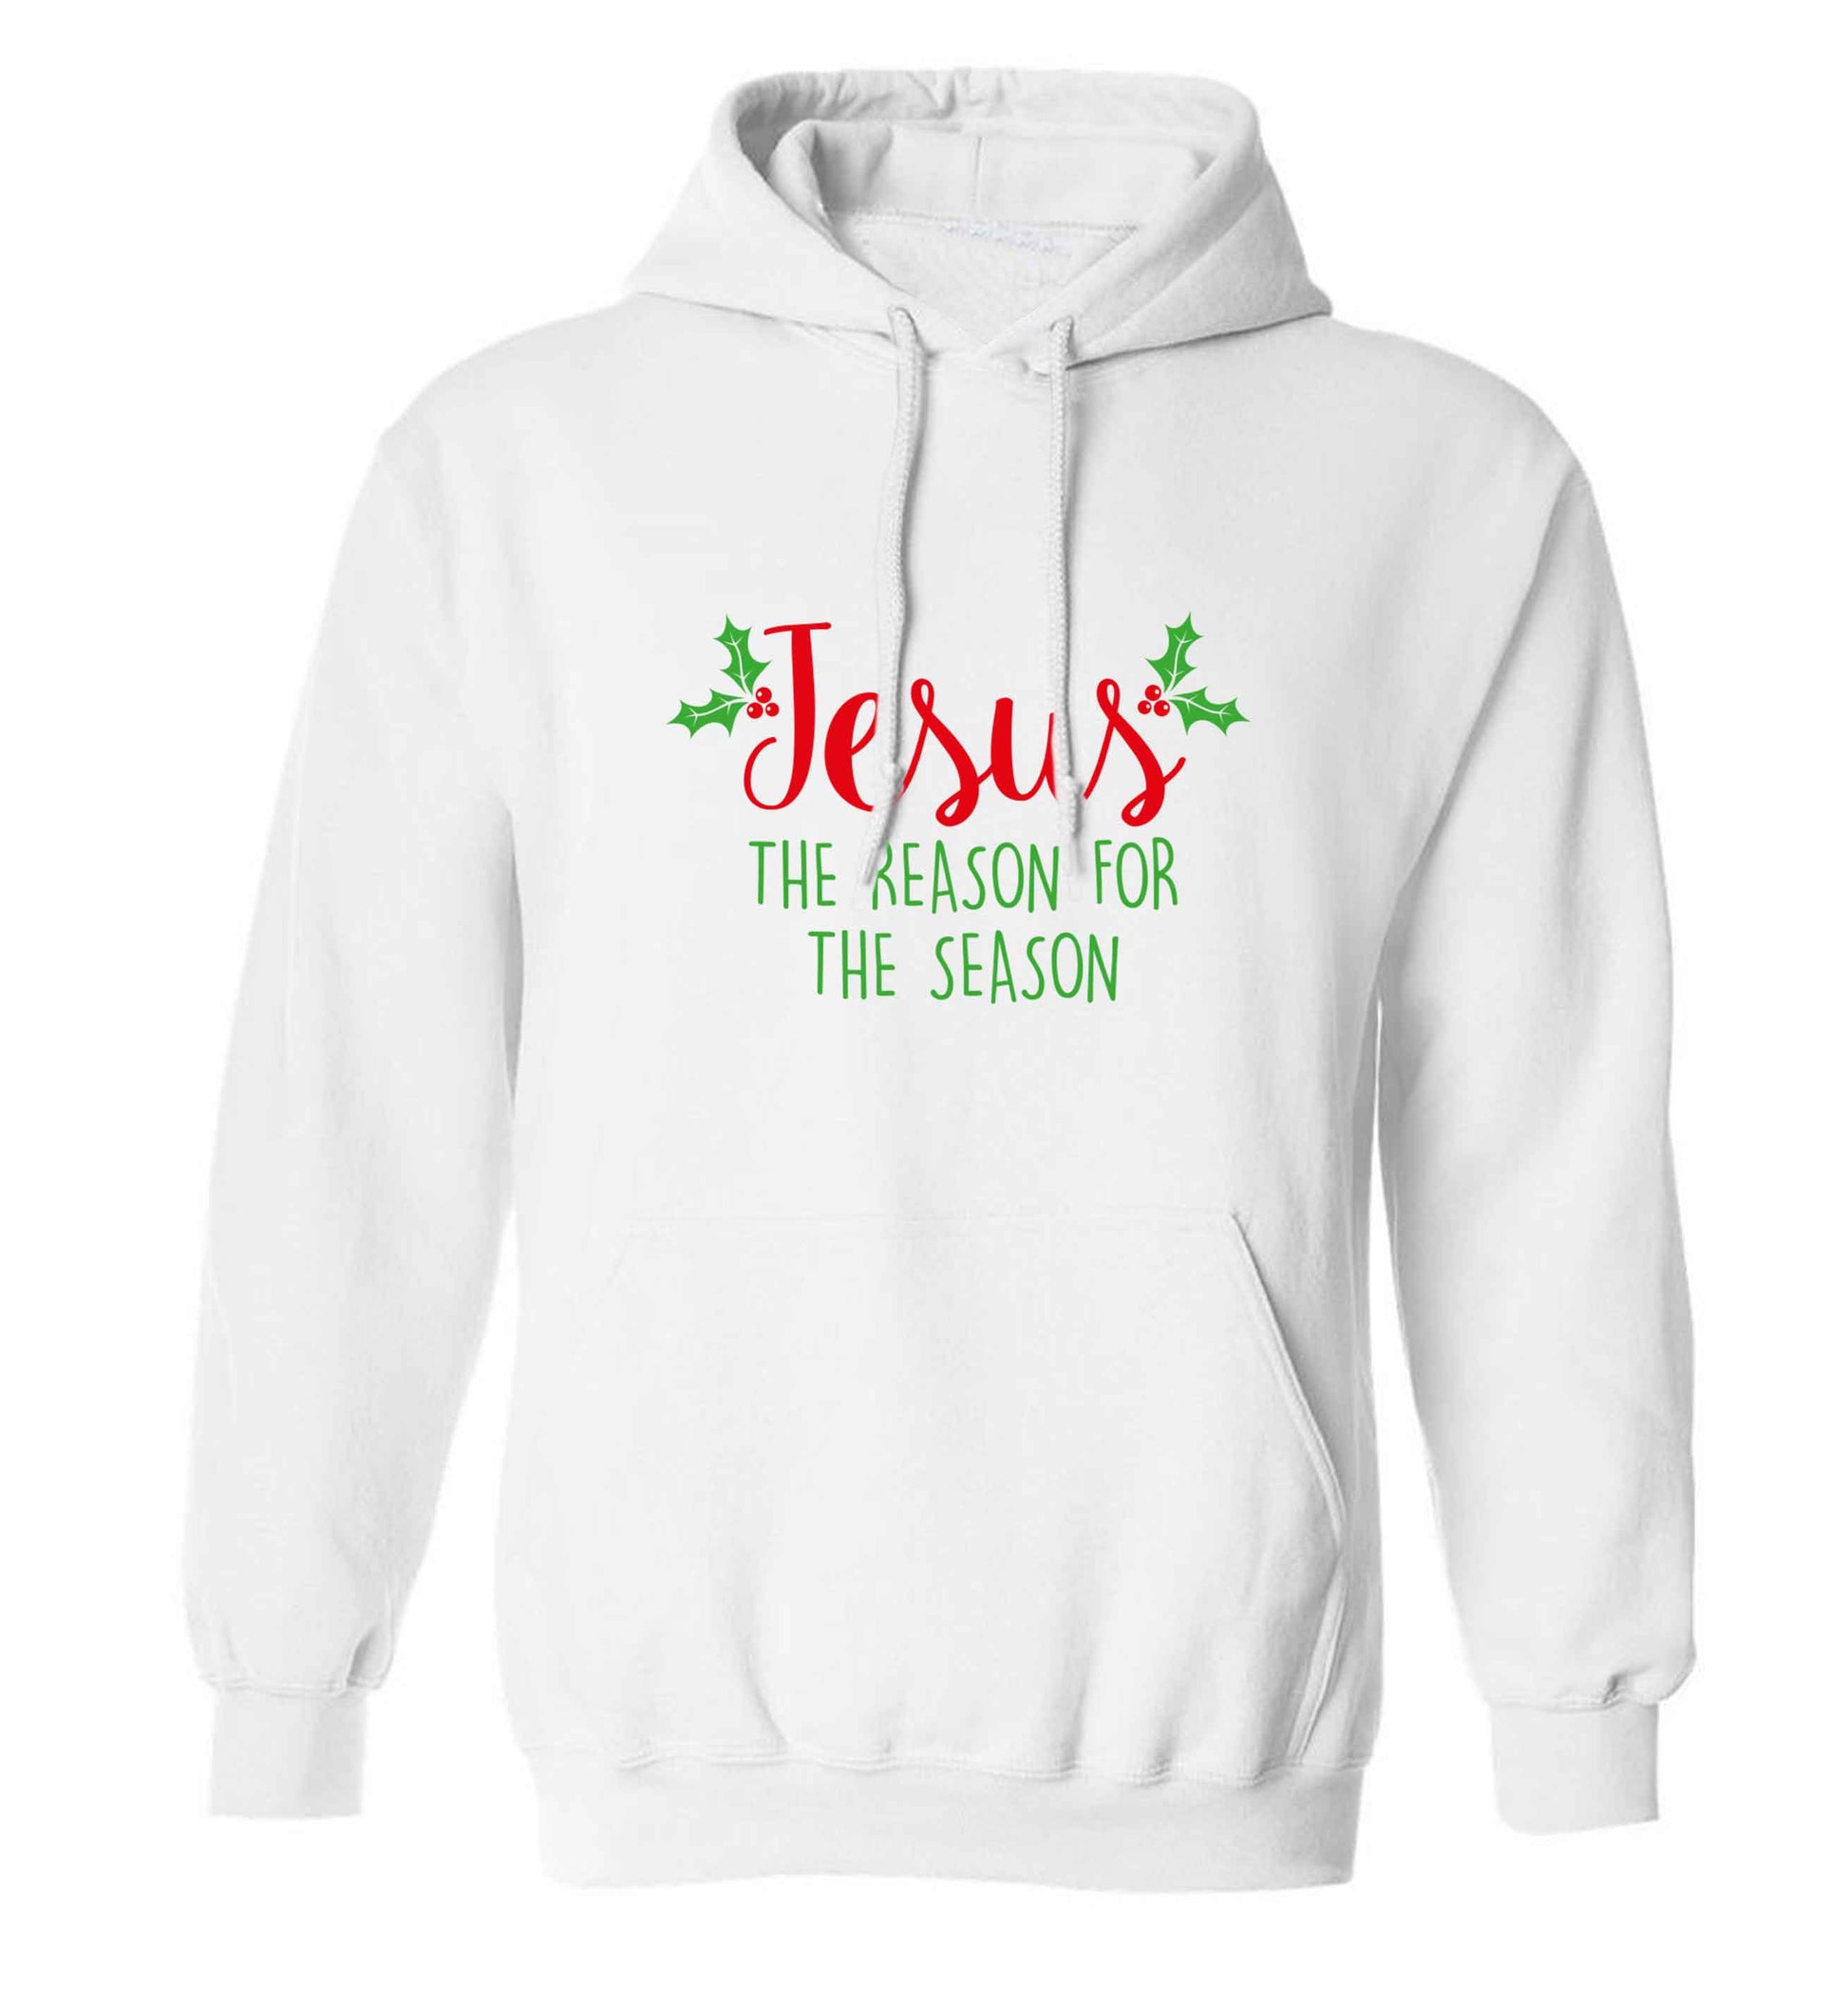 Jesus the reason for the season adults unisex white hoodie 2XL